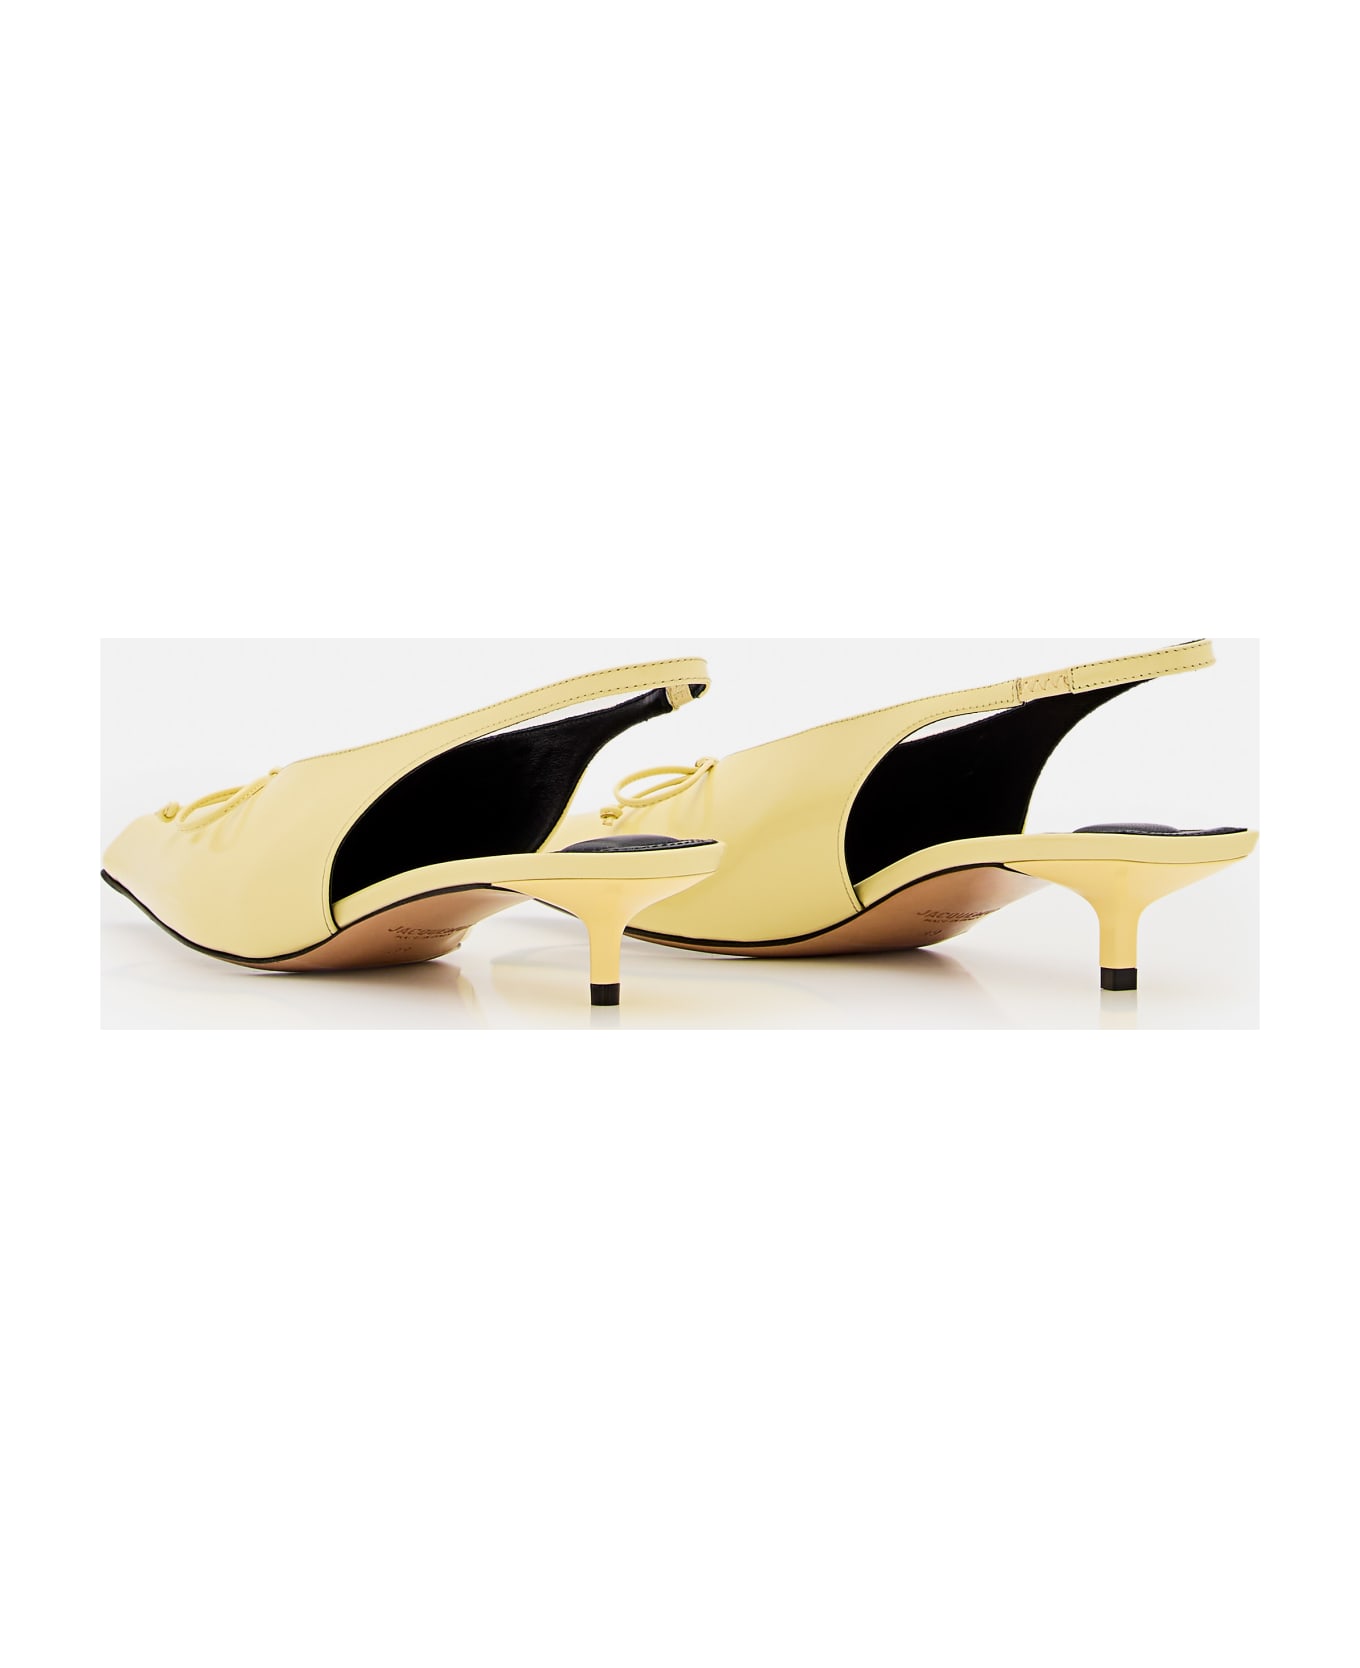 Jacquemus Les Cubisto B Leather Slingback Heels - Yellow